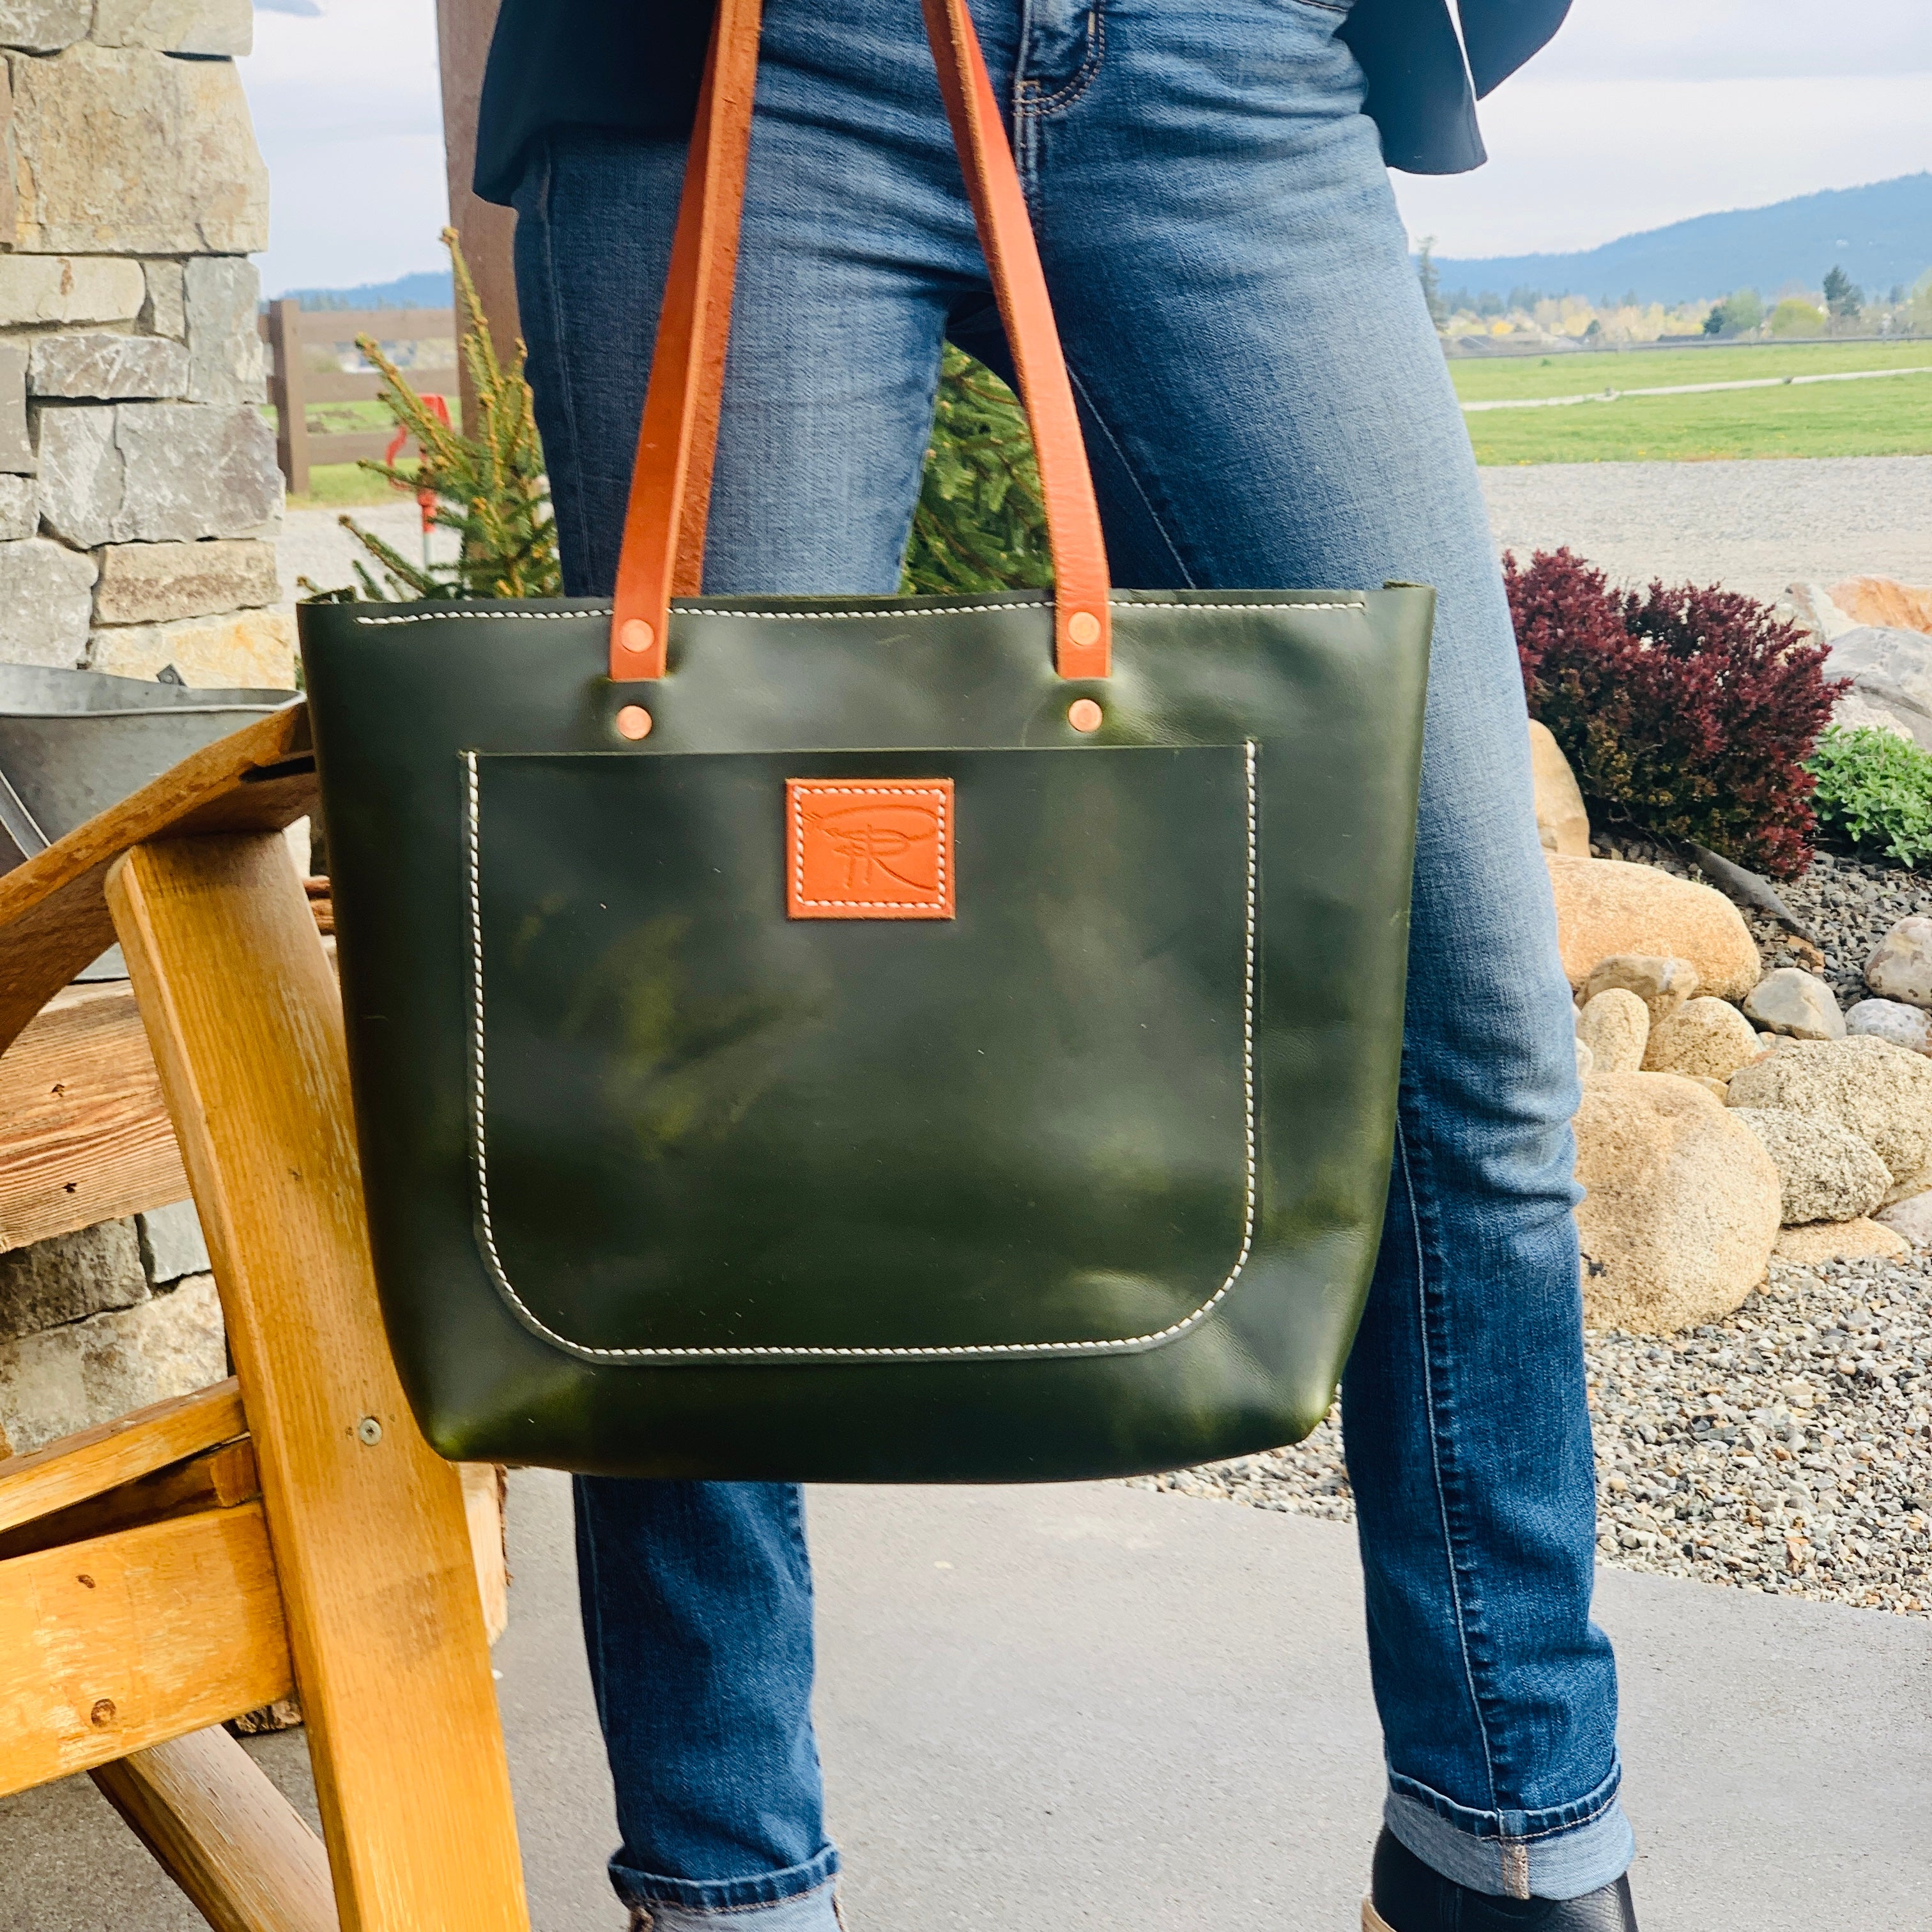 green leather tote bag leather goods everyday carry purses handbags handcrafted gift shop custom made